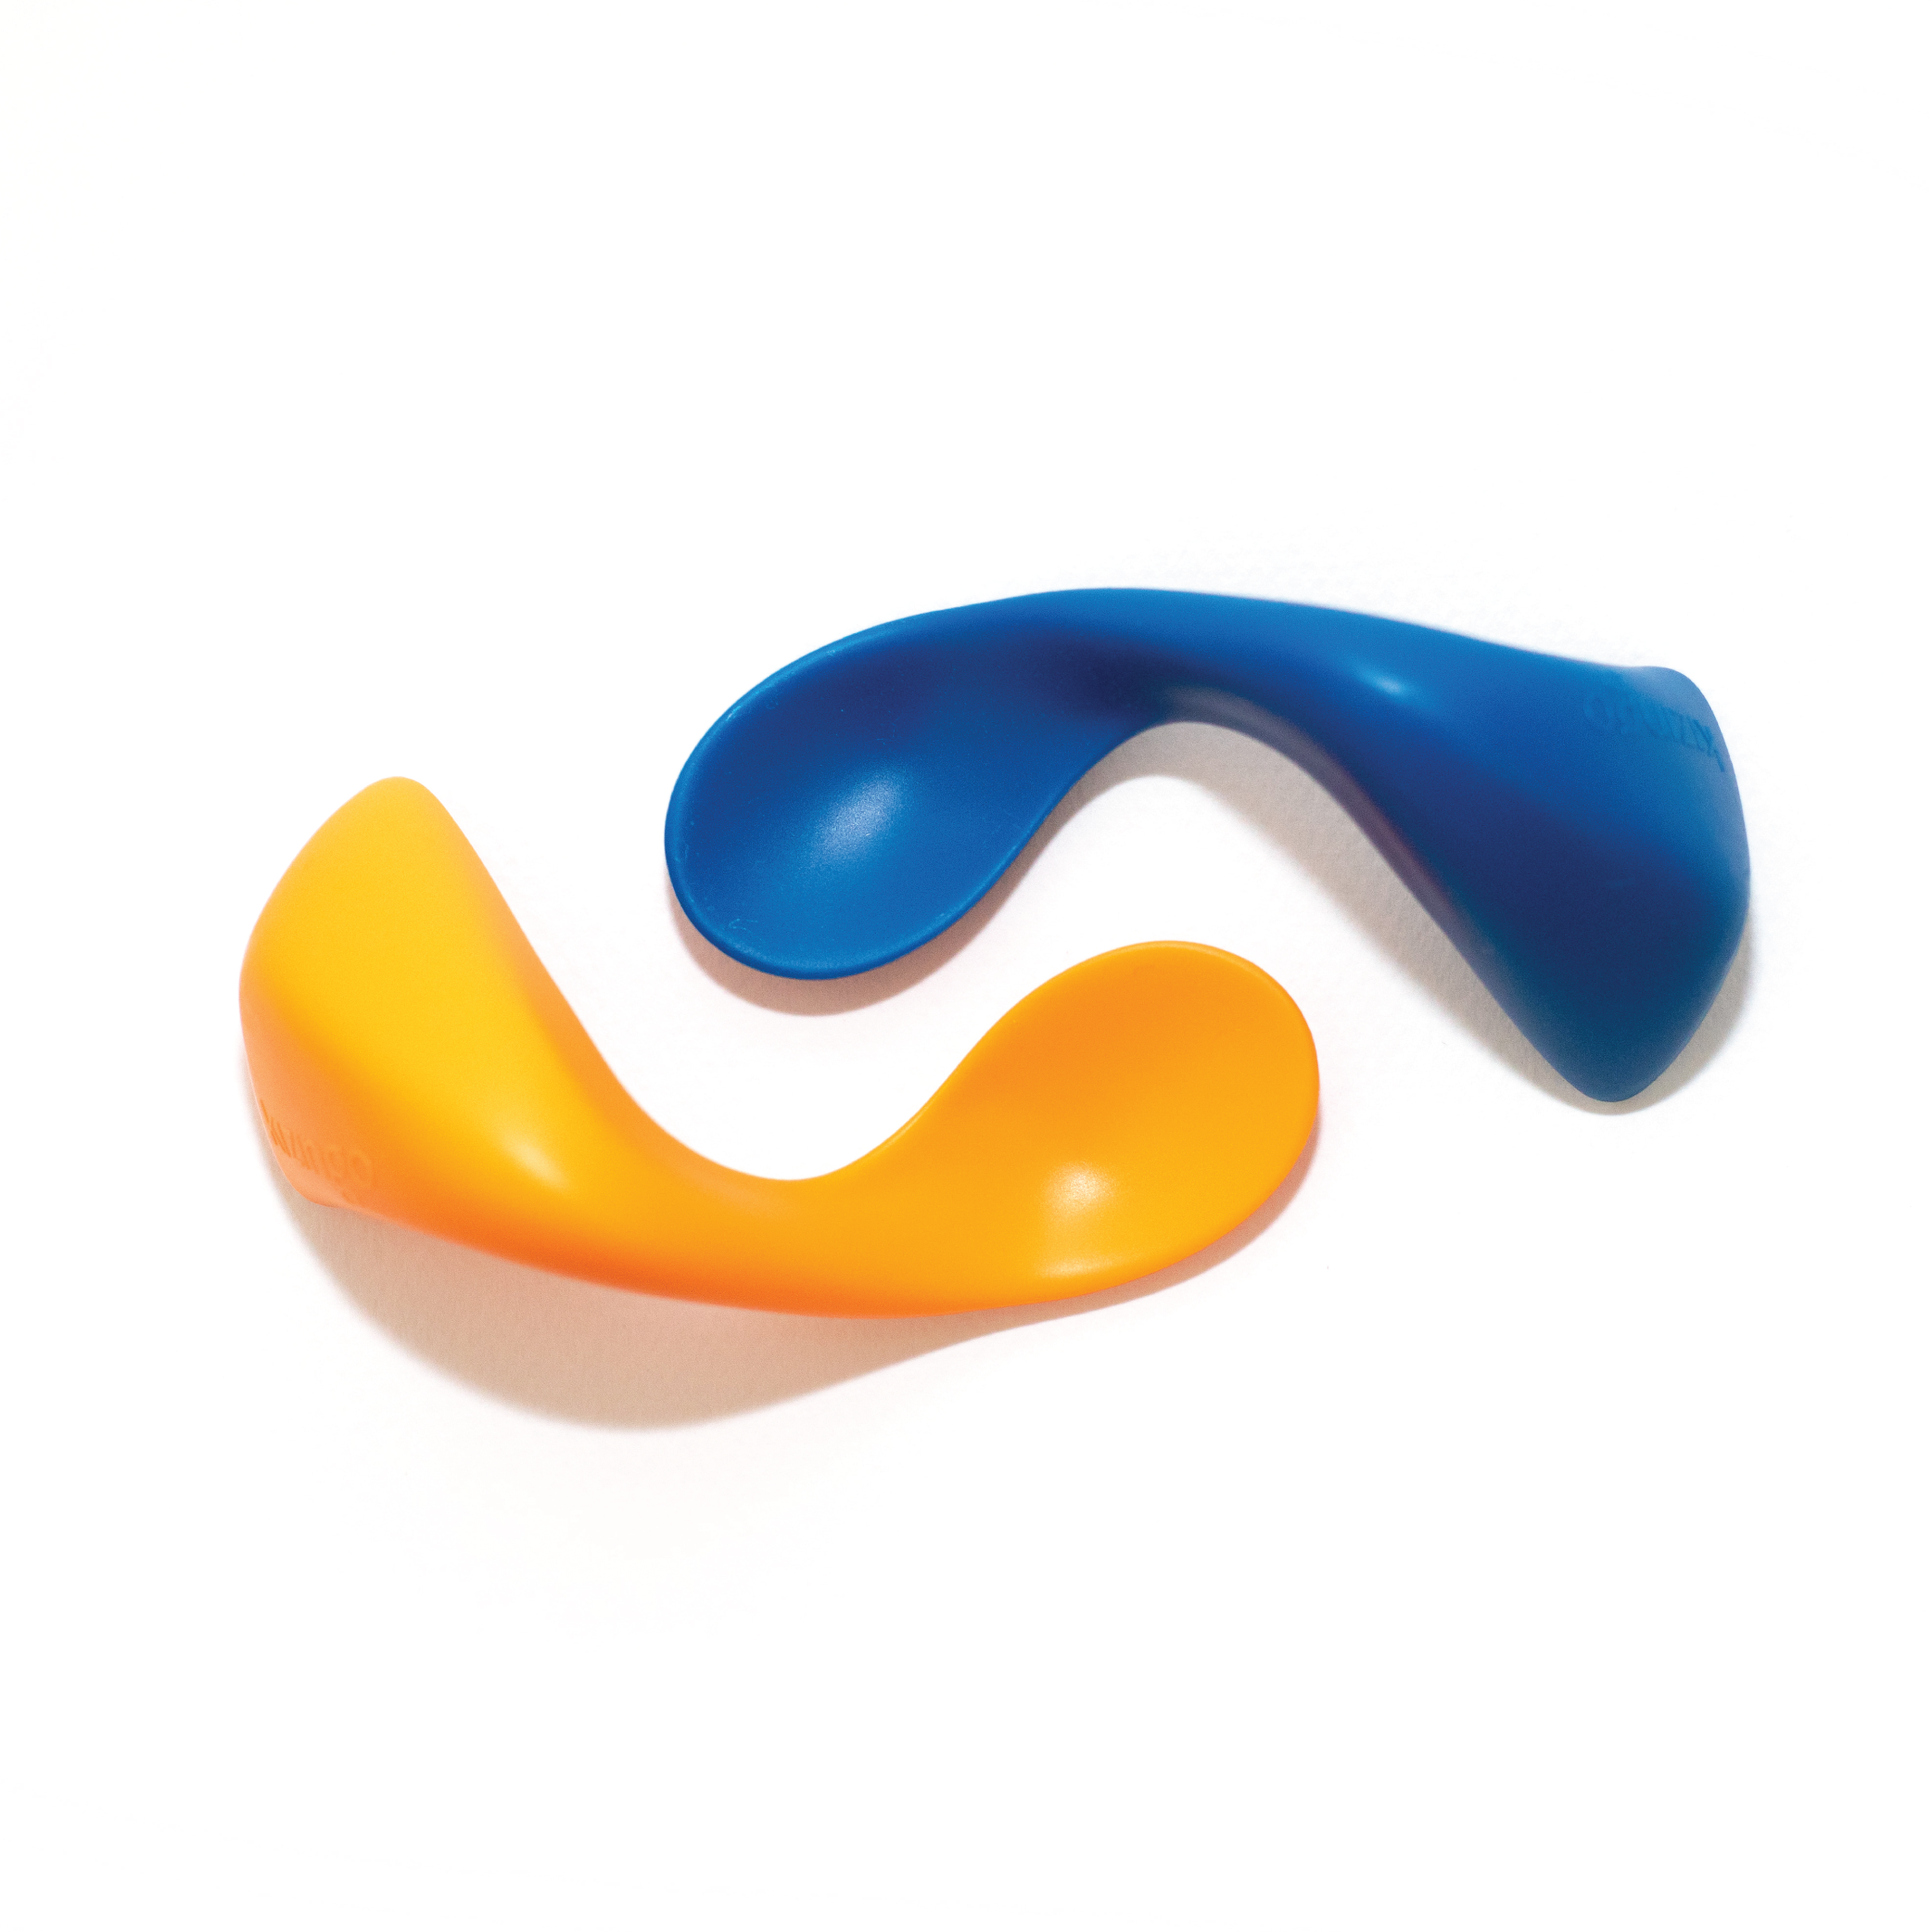 Kizingo Right-Hand Curved Baby Spoons for Toddler Self Feeding, (2 Pack,  Blue and Orange)